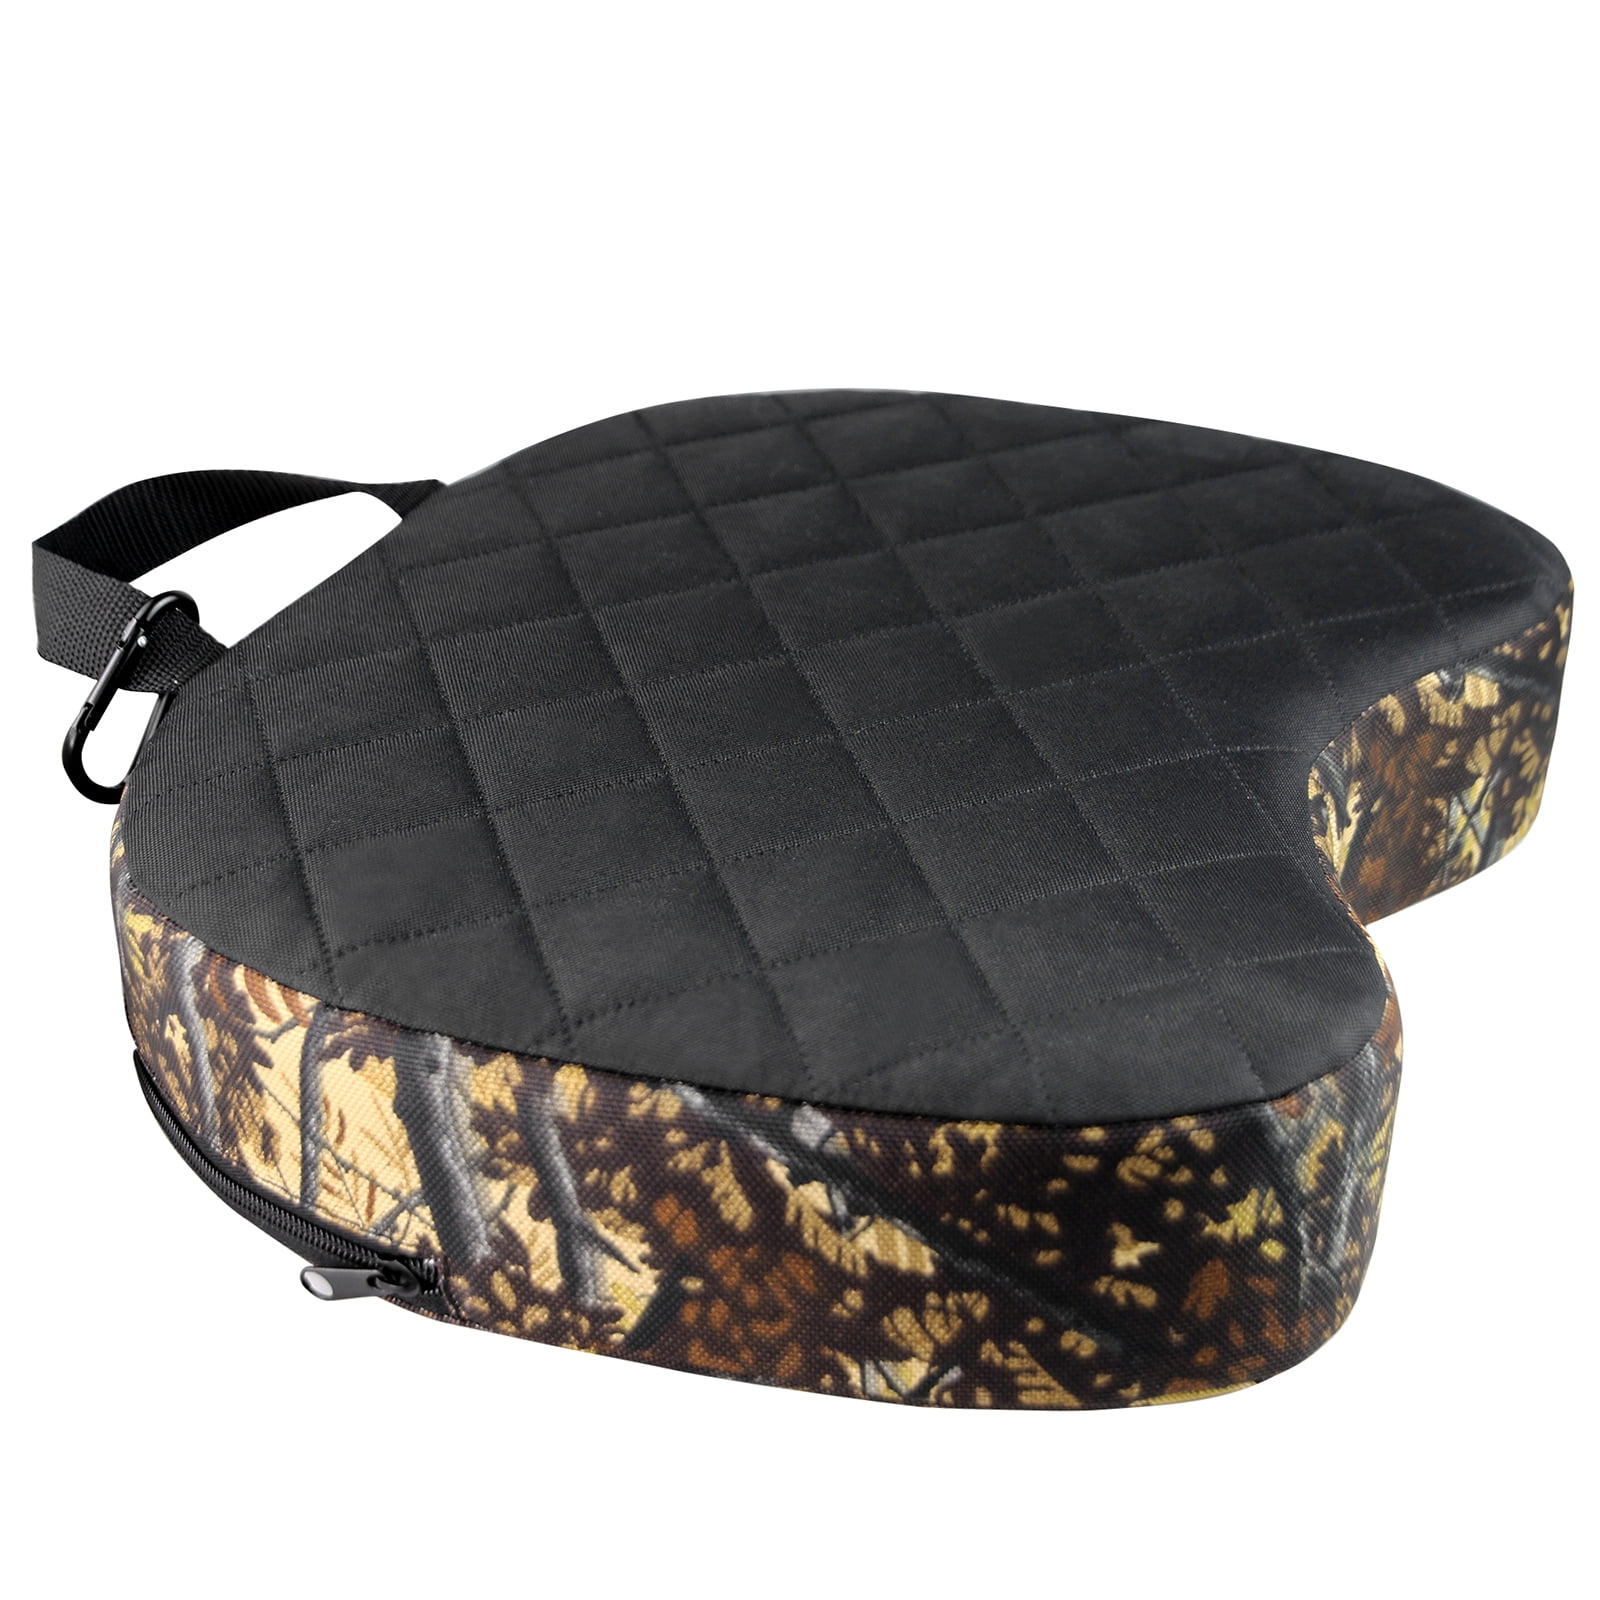 Camouflage Outdoor Camping Seat Cushion Portable Stadium Seat Cushion  Padded Seat For Sporting Events And Outdoor